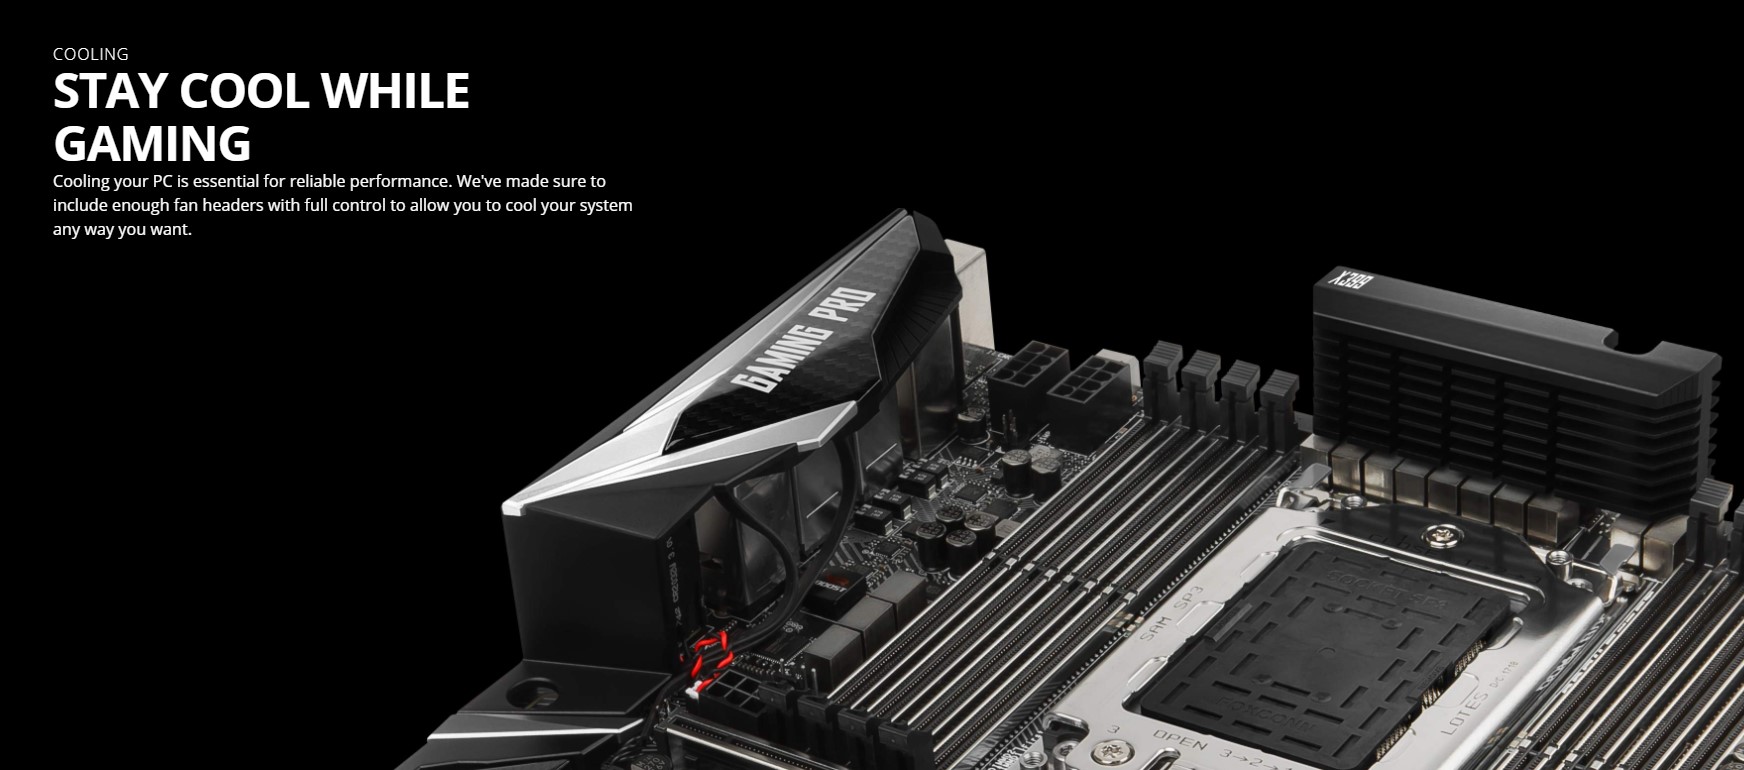 Mainboard MSI X399 GAMING PRO CARBON AC